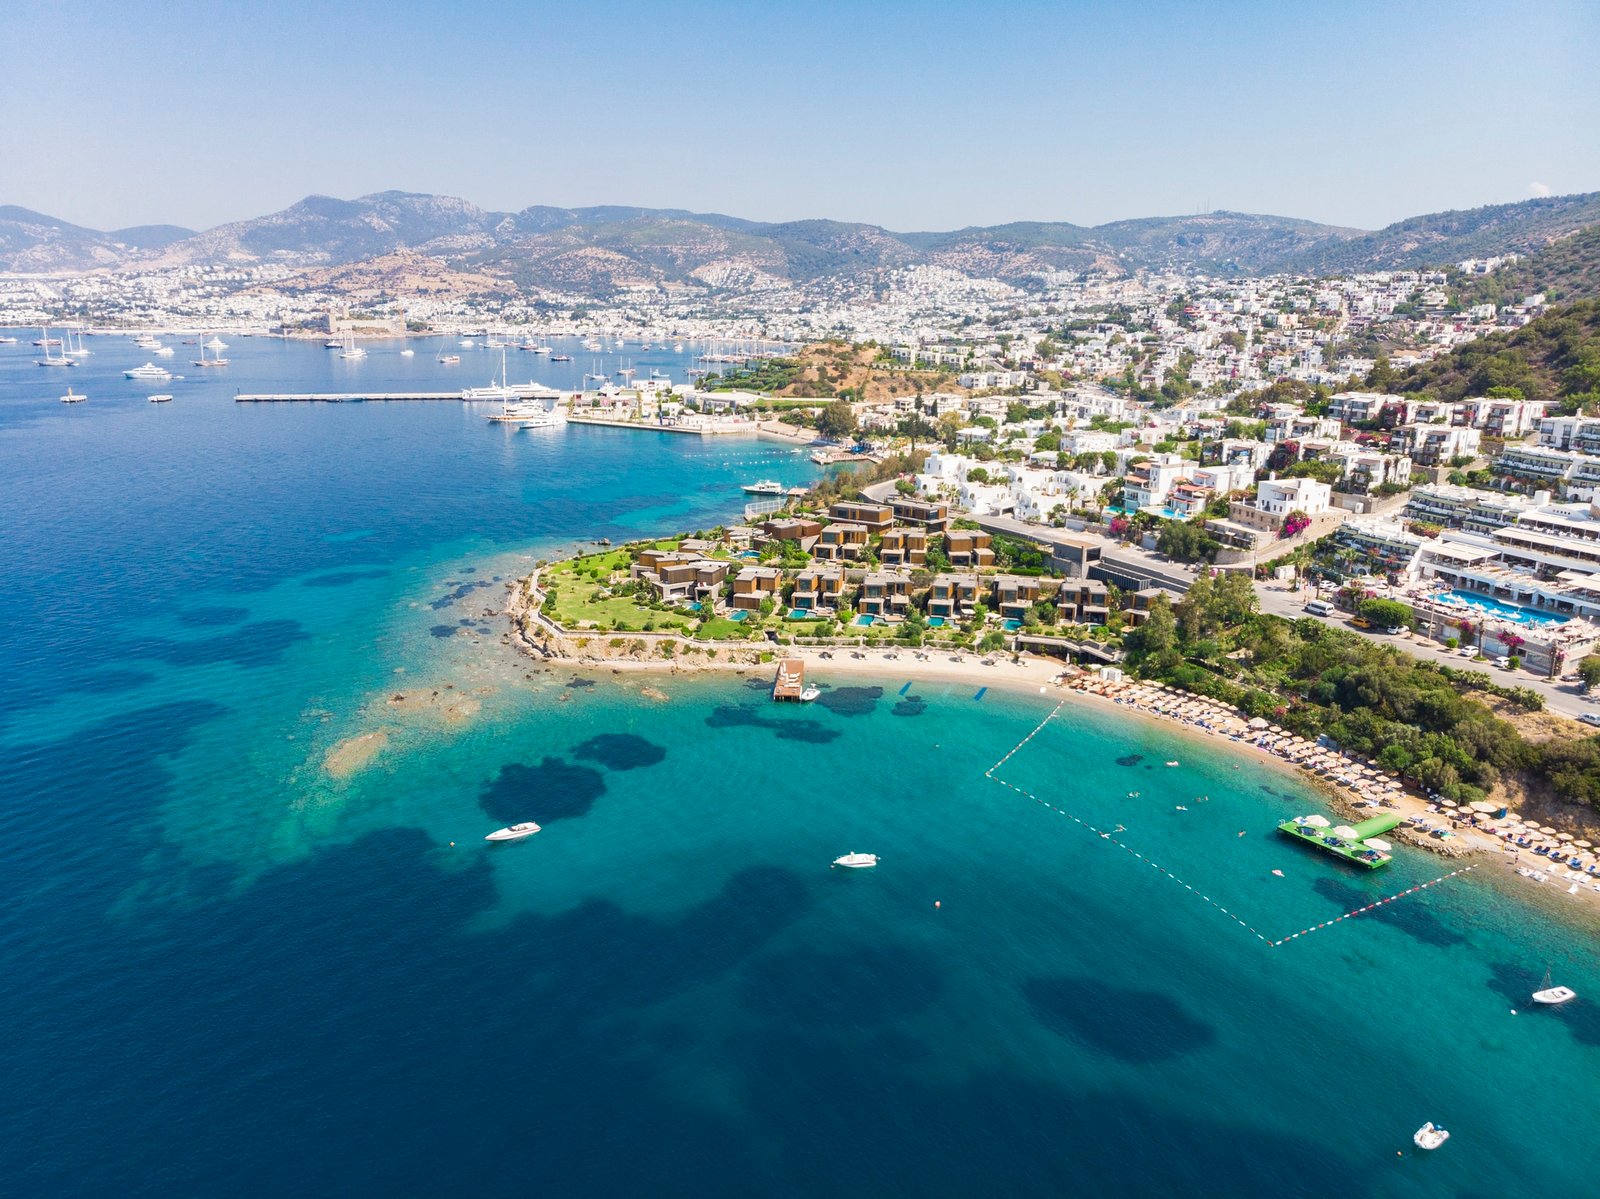 Aerial view of sunny Bodrum with resorts and beachfront villas, Turkey